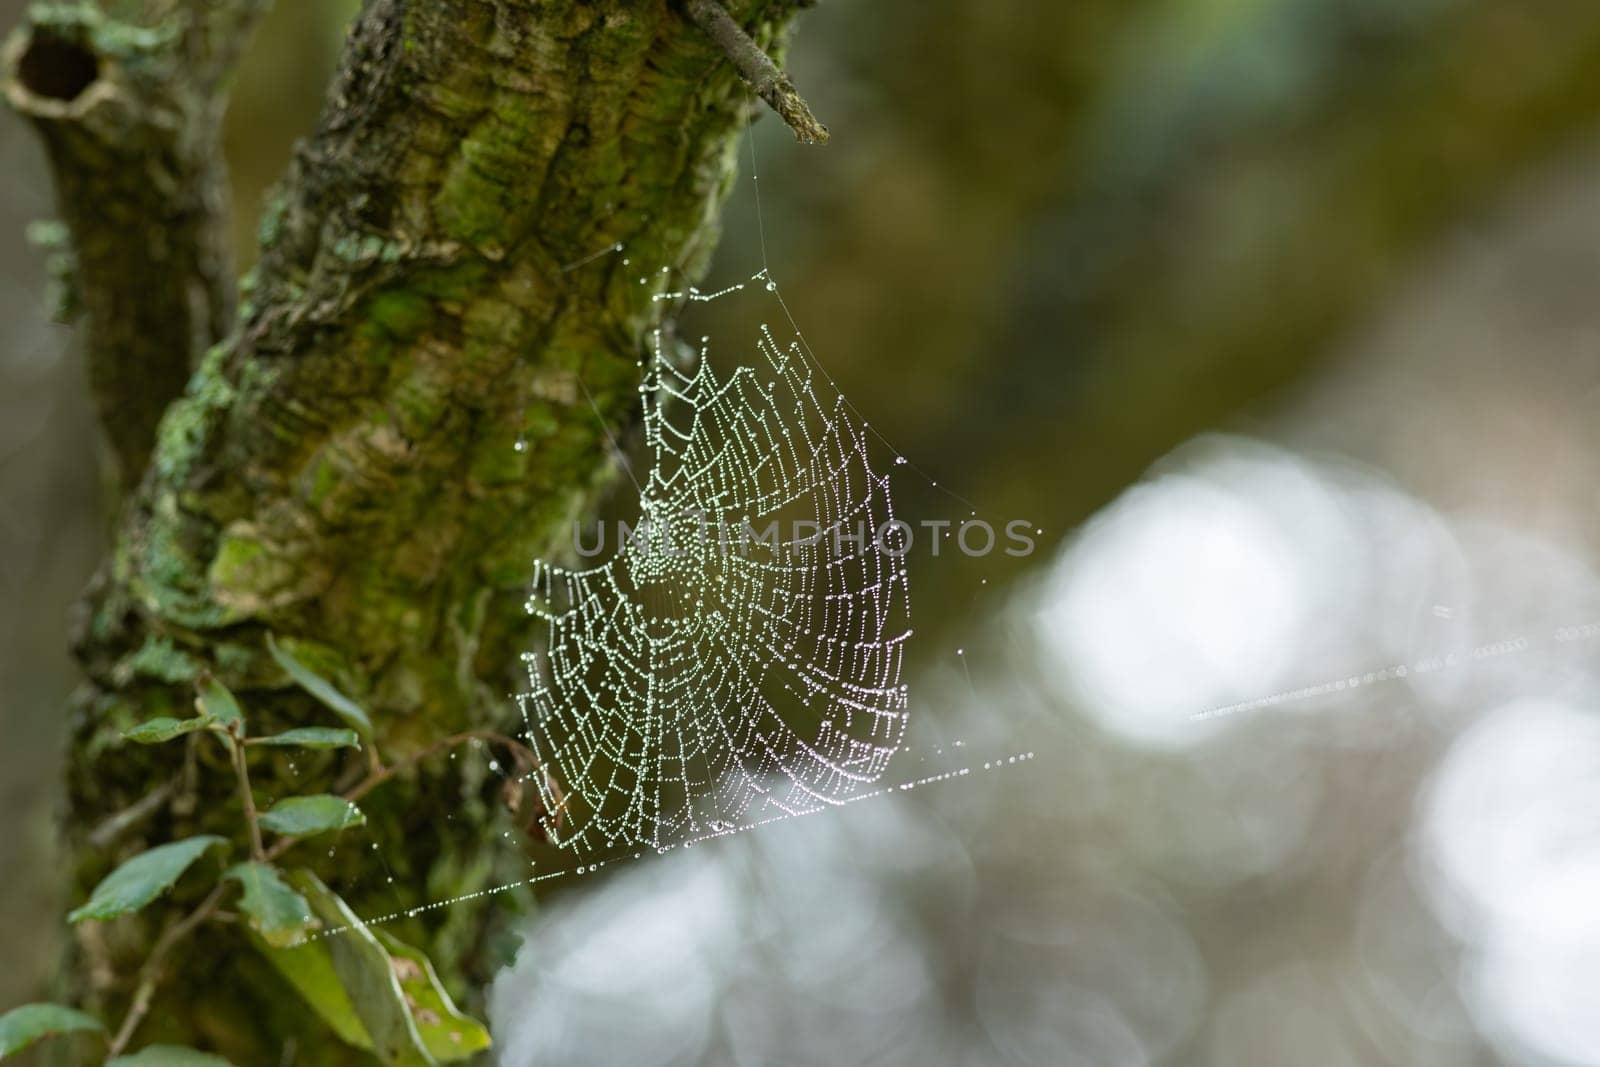 A spider web hanging from a tree branch